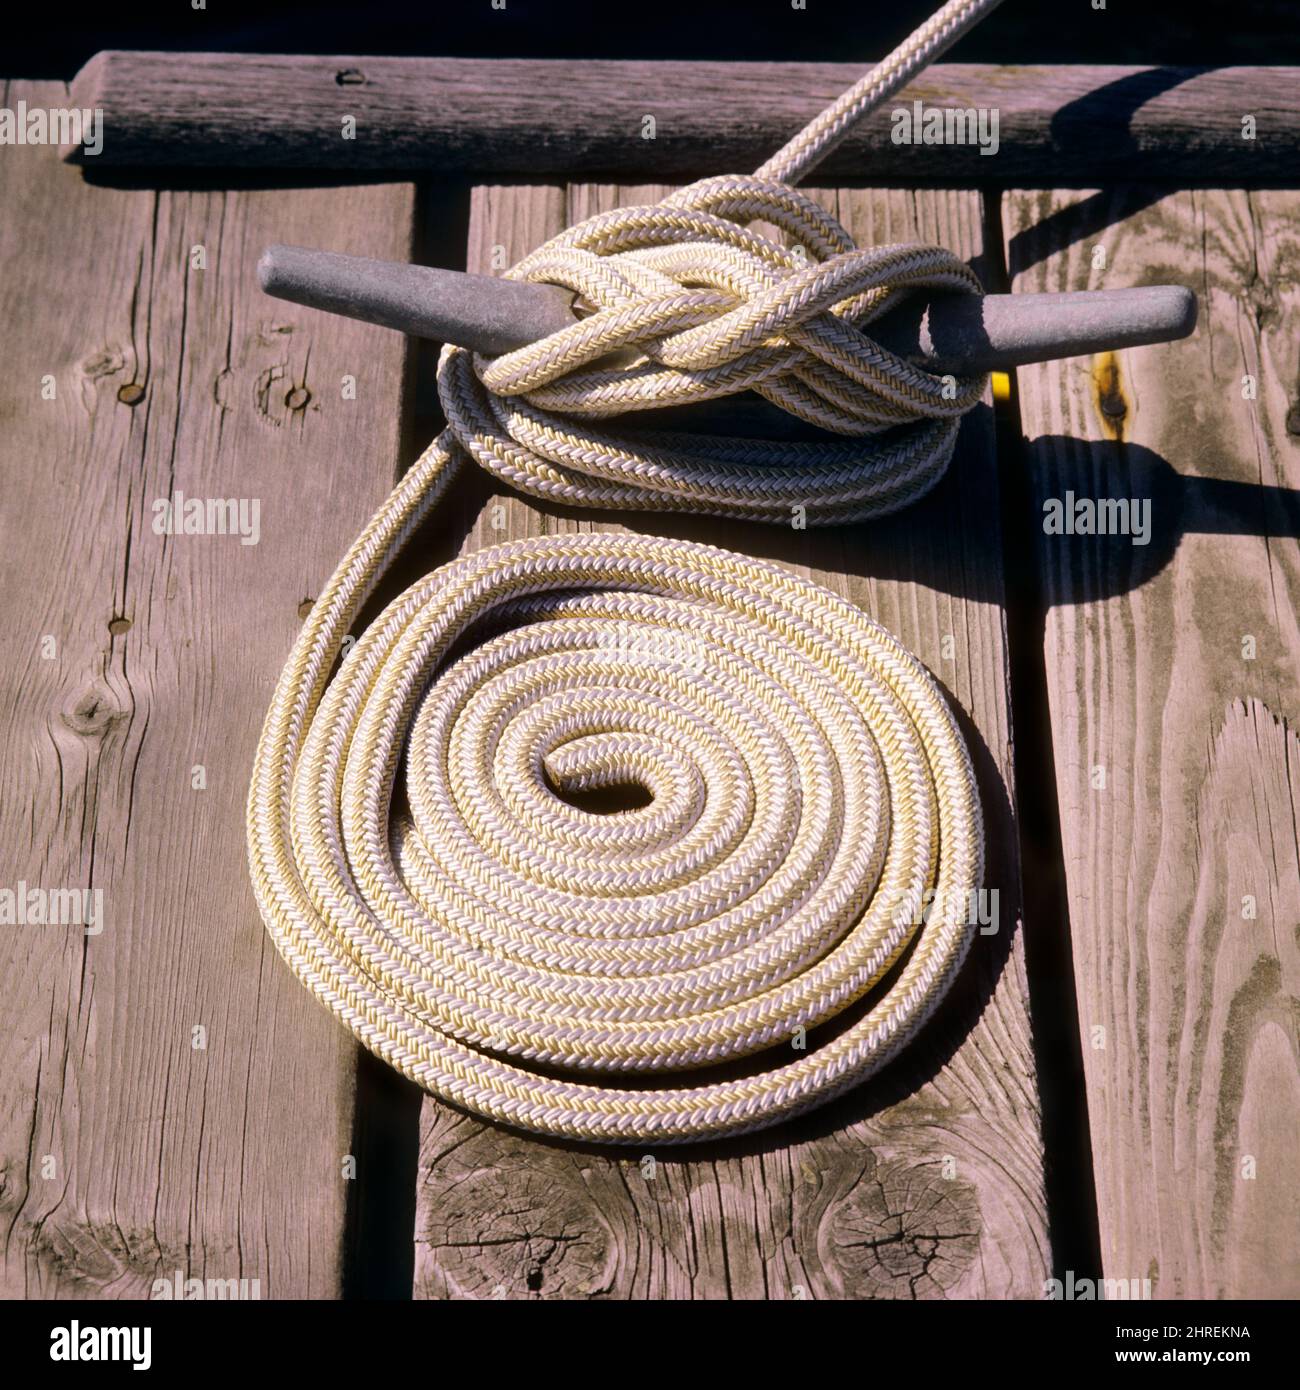 1970S CLOSE-UP COILED SEIL ON BOAT DOCK NEXT TO SECURING HORN CLAAT HITCH KNOT - KS14664 RSS001 HARS CONNECTION CONCEPTUAL STILL LIFE CLOSE-UP COILED HITCH COIL SYMBOLISCHE CLEAT CLOSE UP KONZEPTE VERZINKTE IDEEN PRÄZISION SICHER GEWEBT ALTMODISCH DARSTELLUNG SYNTHETISCH Stockfoto